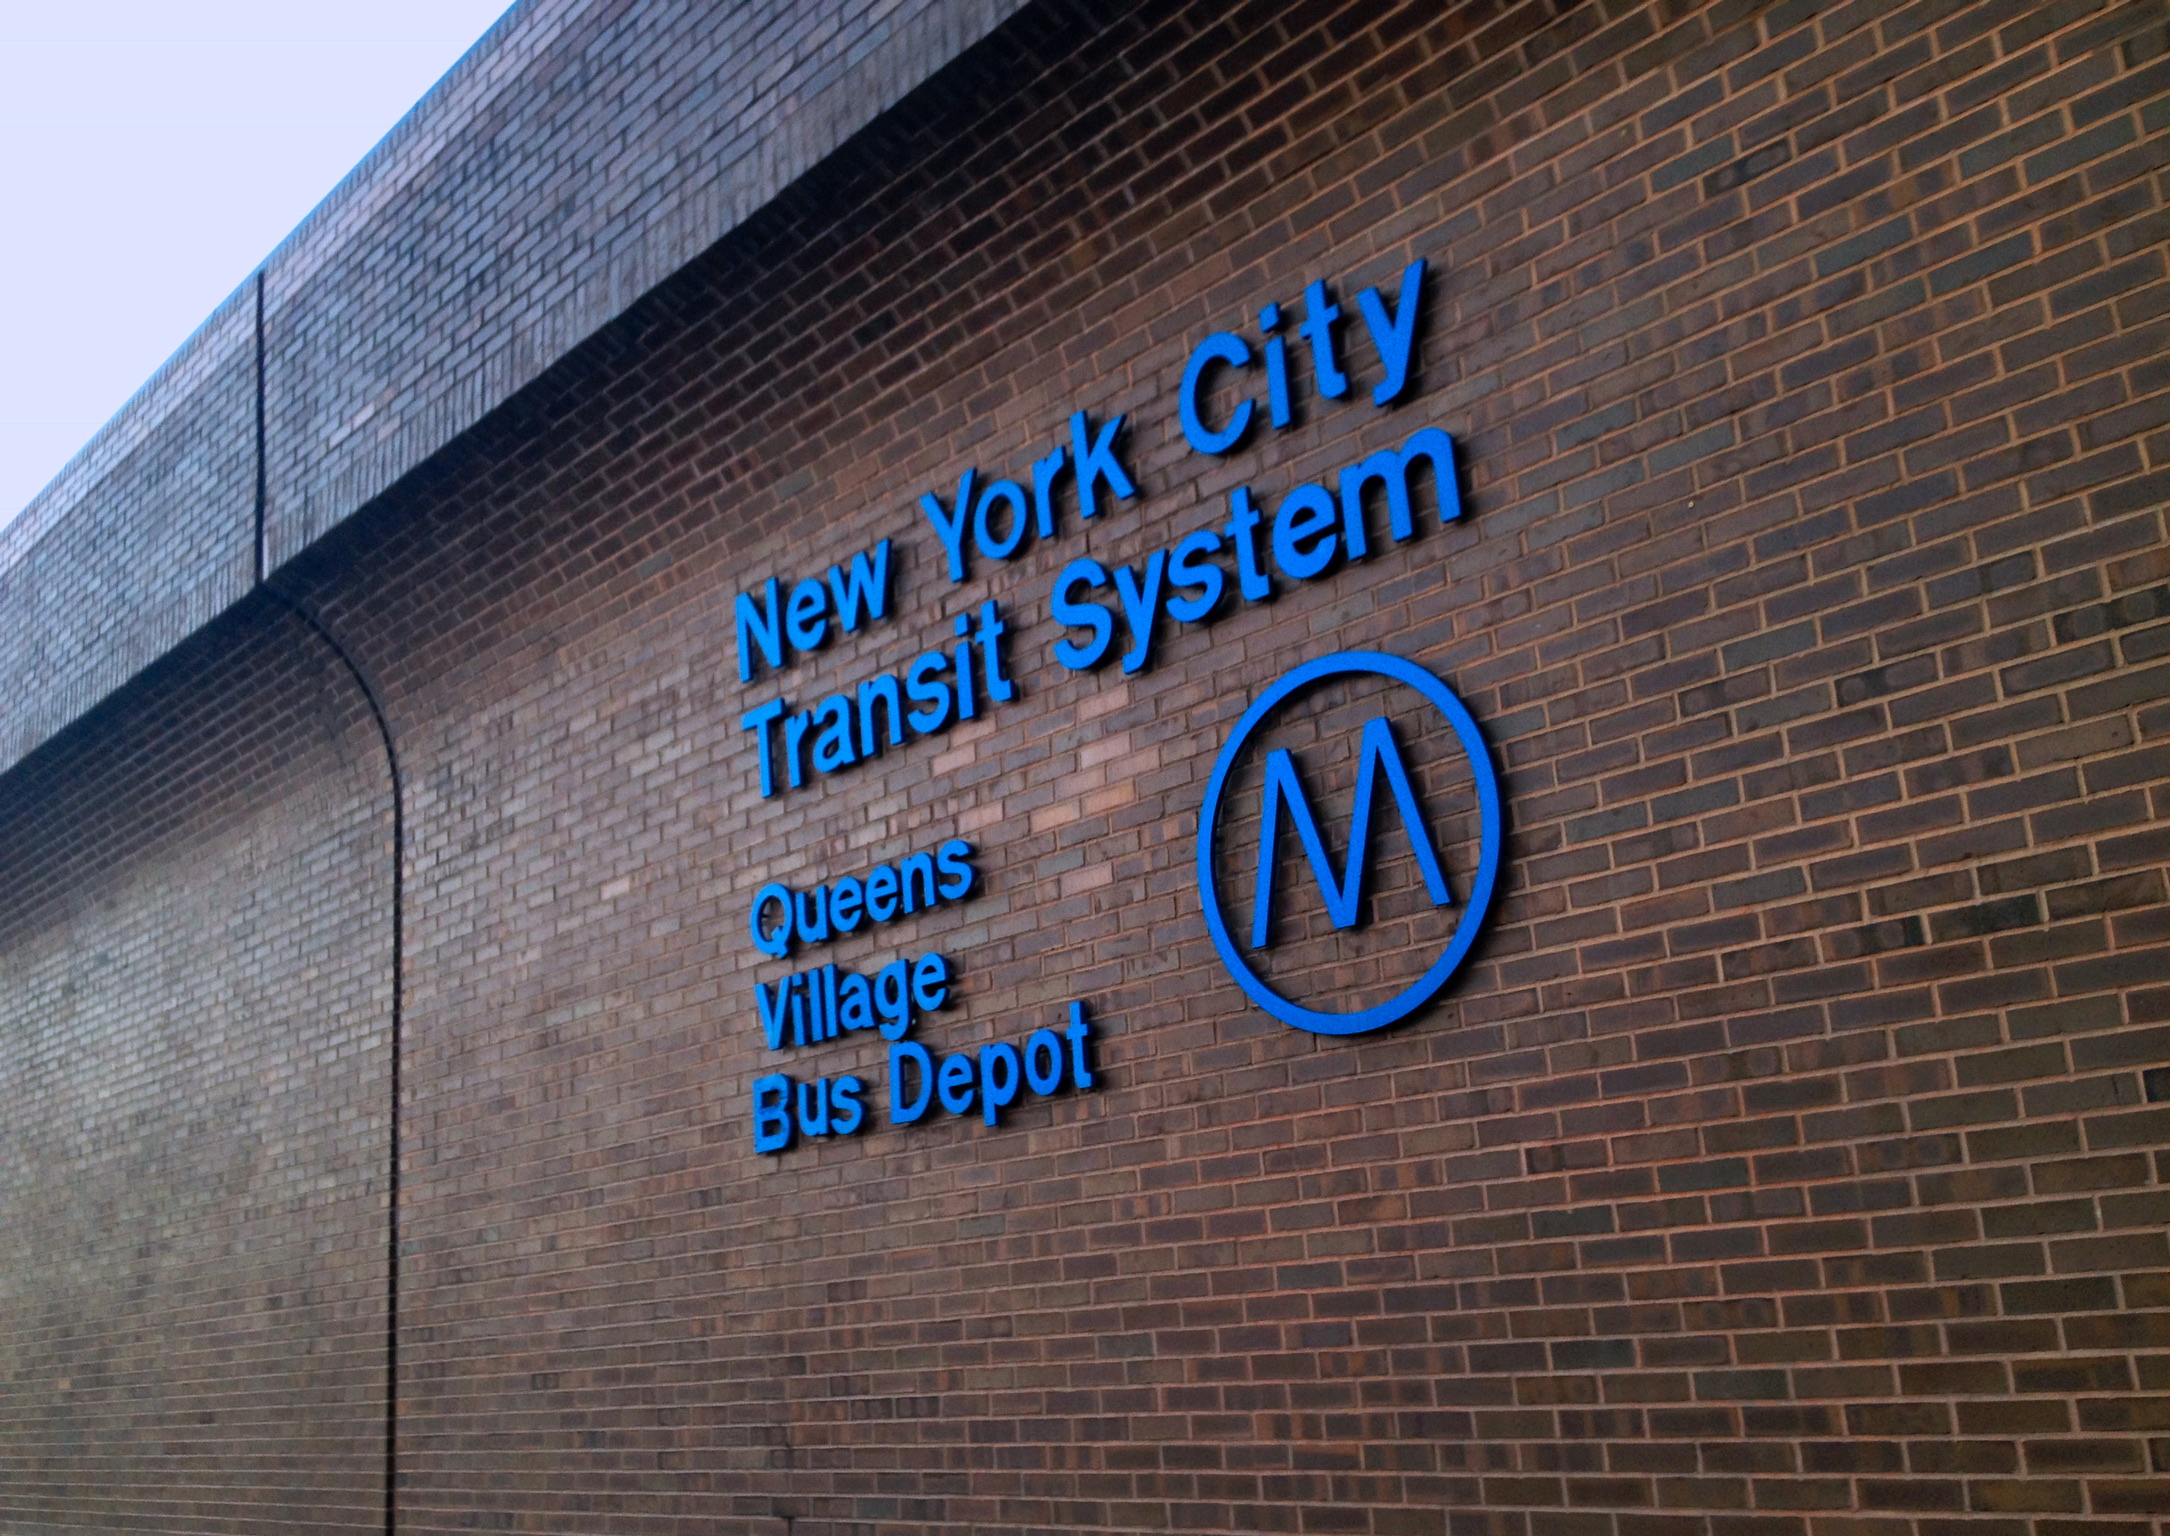 wall - New York City Tansit System M Queens Village Bus Depot